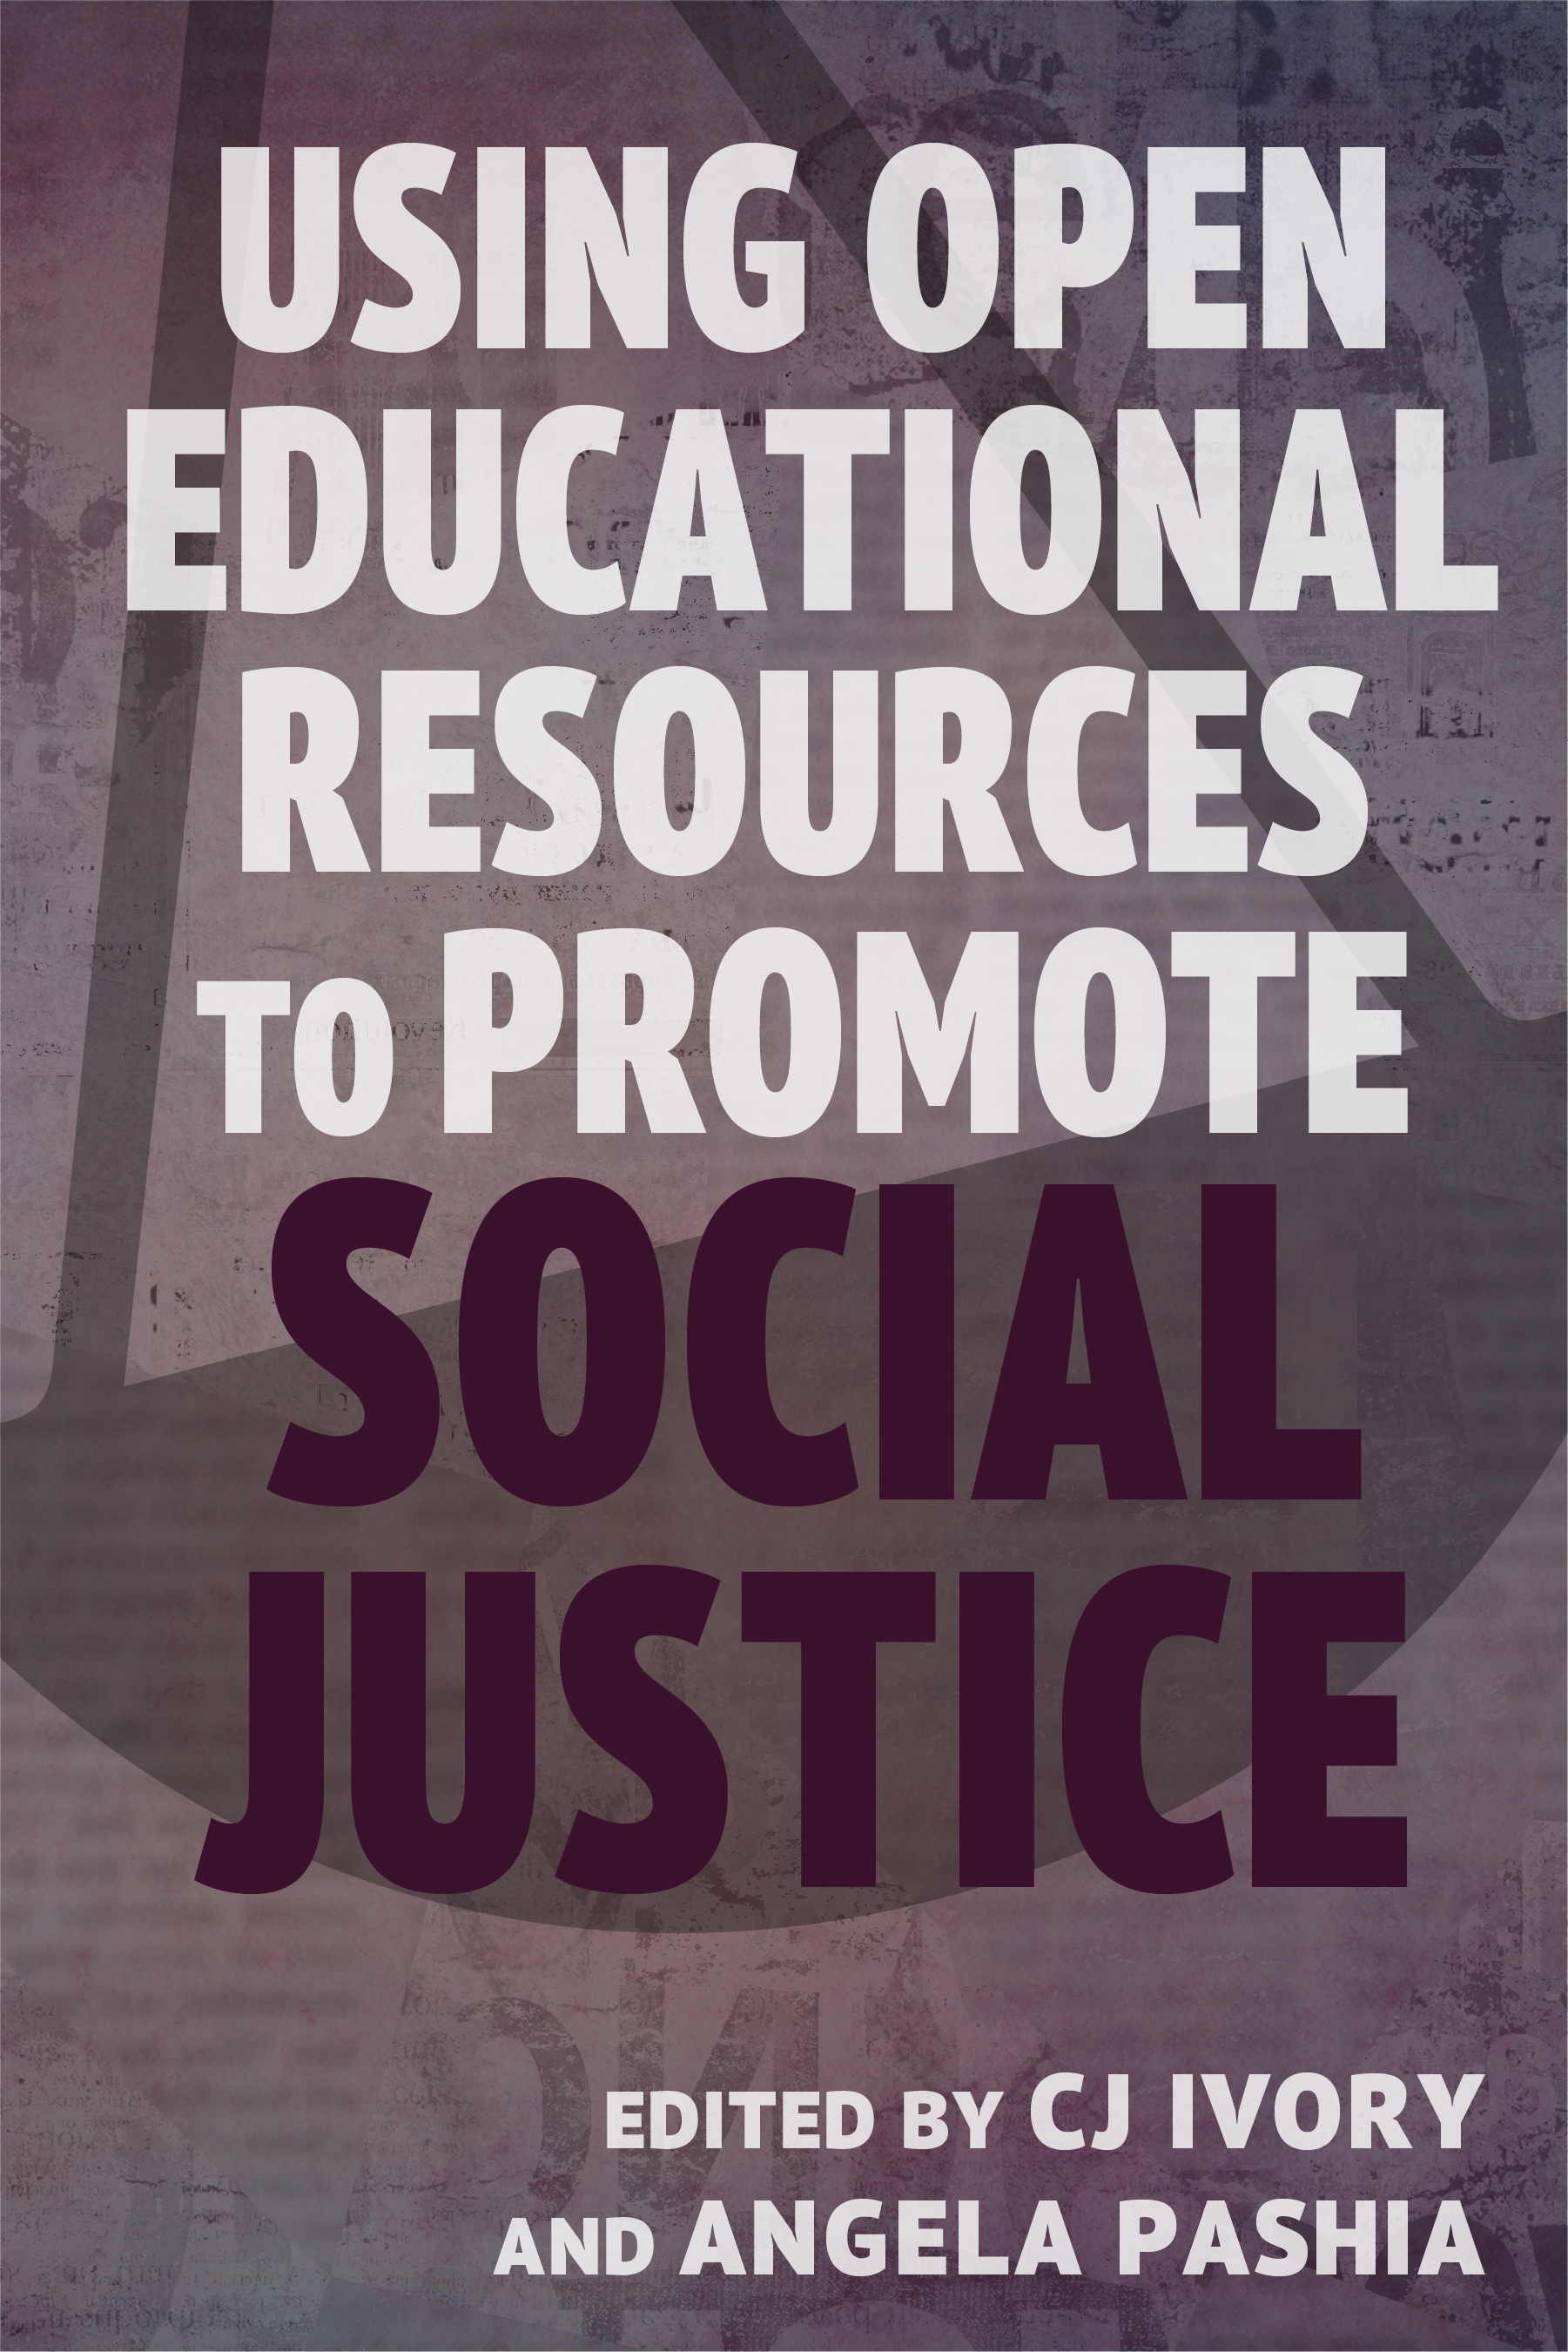 Using Open Educational Resources to Promote Social Justice